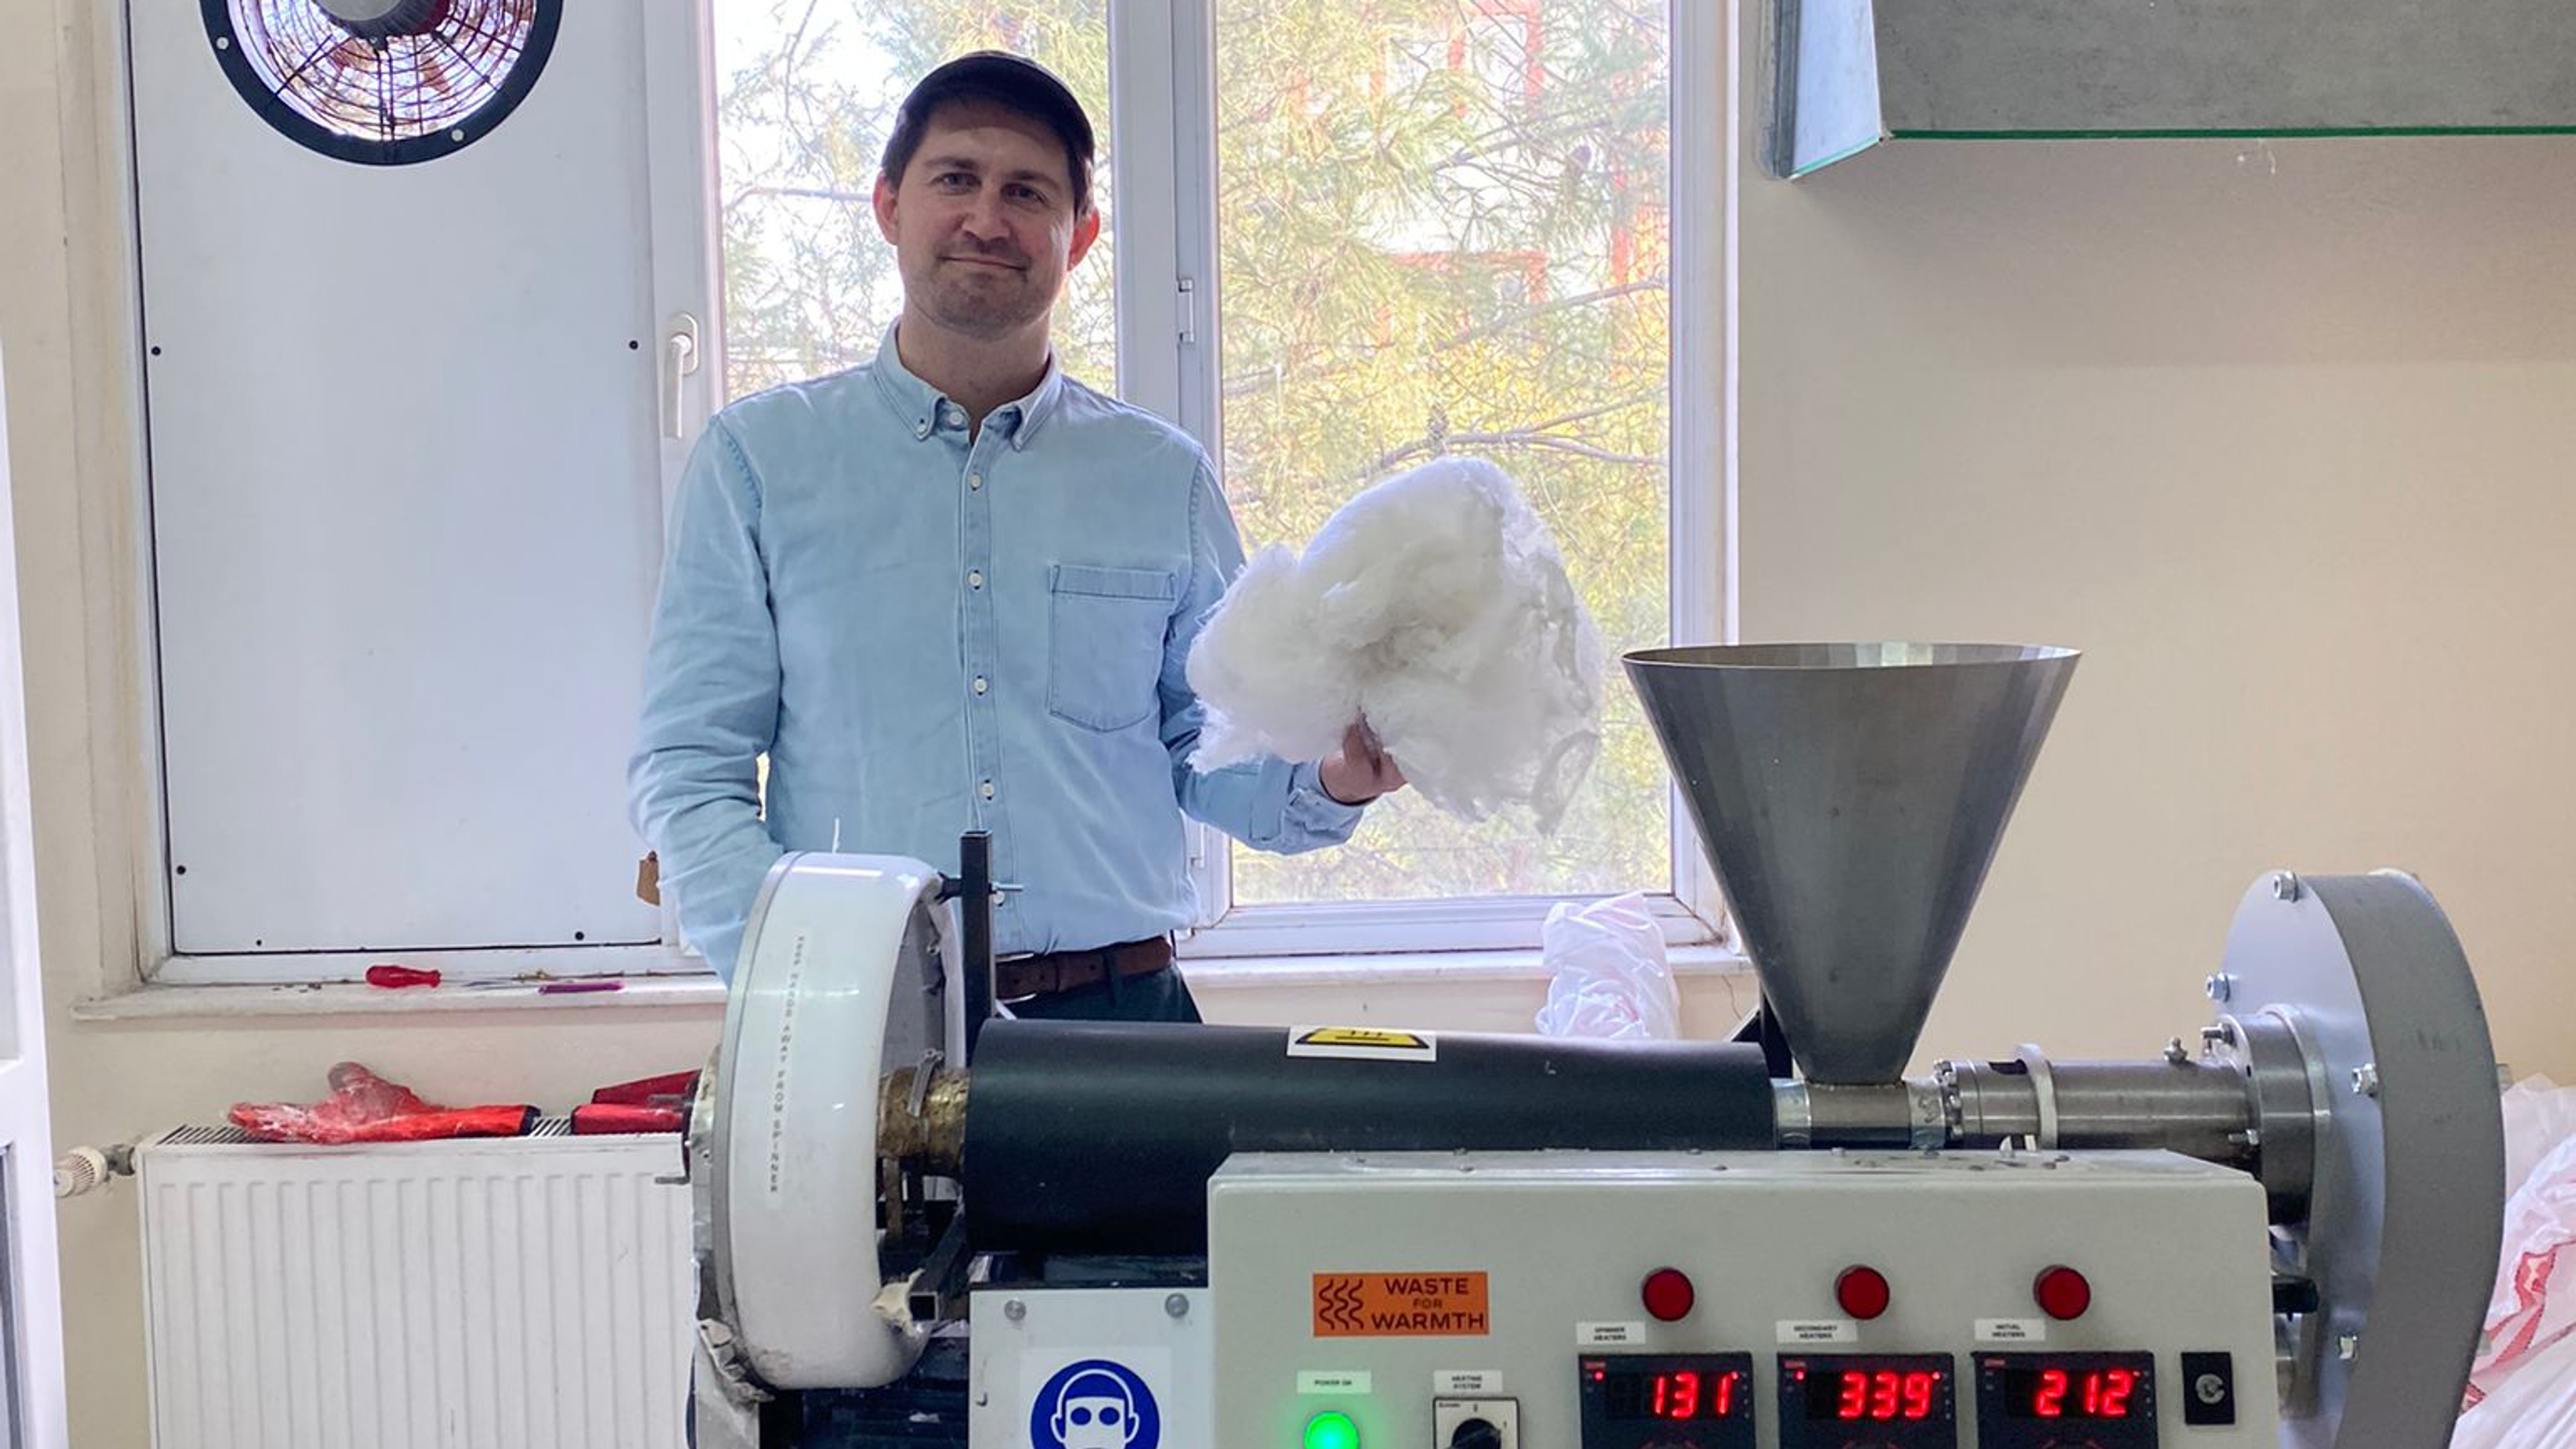 Egil Reksten is the project manager in the Waste for Warmth project led by Engineers Without Borders Norway. Here he is testing the Polyfloss machine that can make tent insulation from plastic waste.